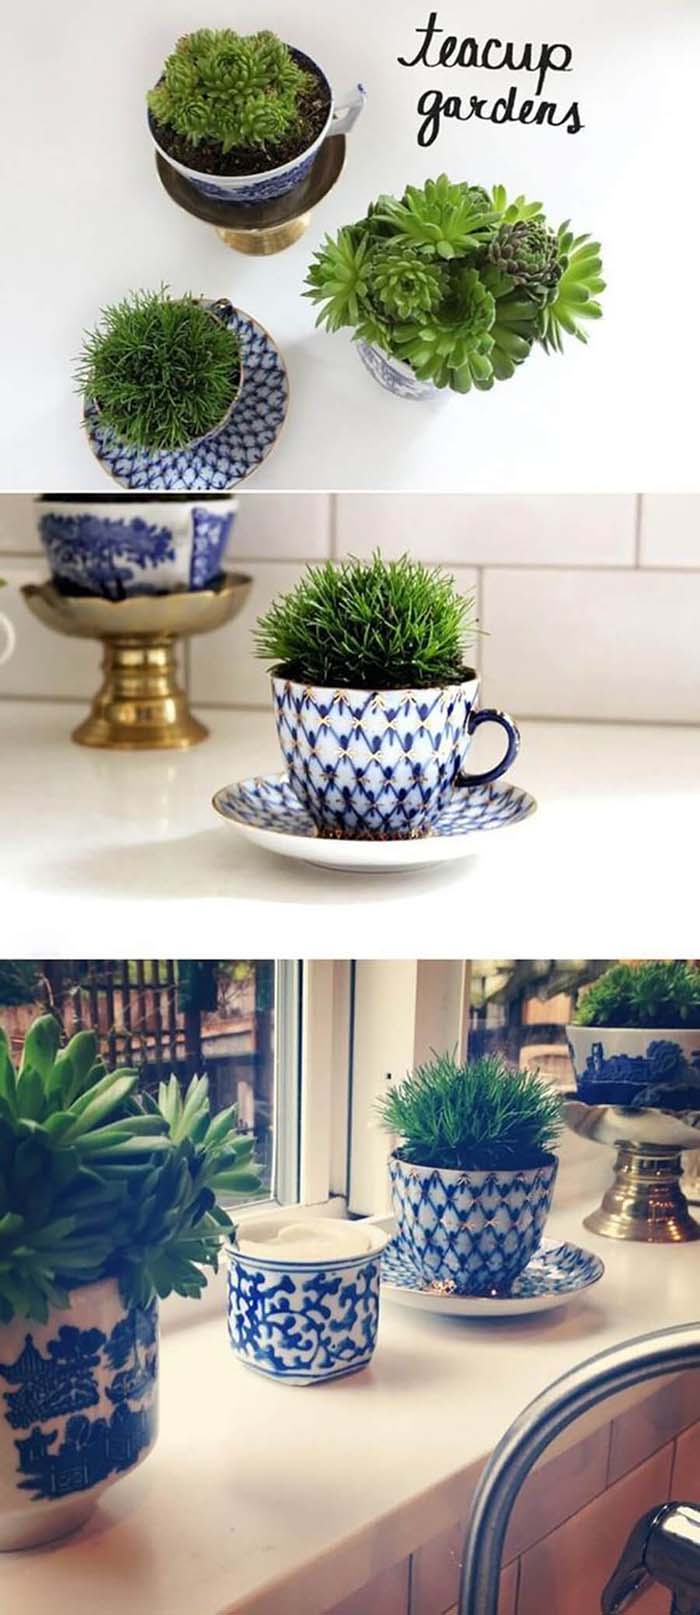 Fill a Cup with Succulents #homedecor #hacks #decorhomeideas